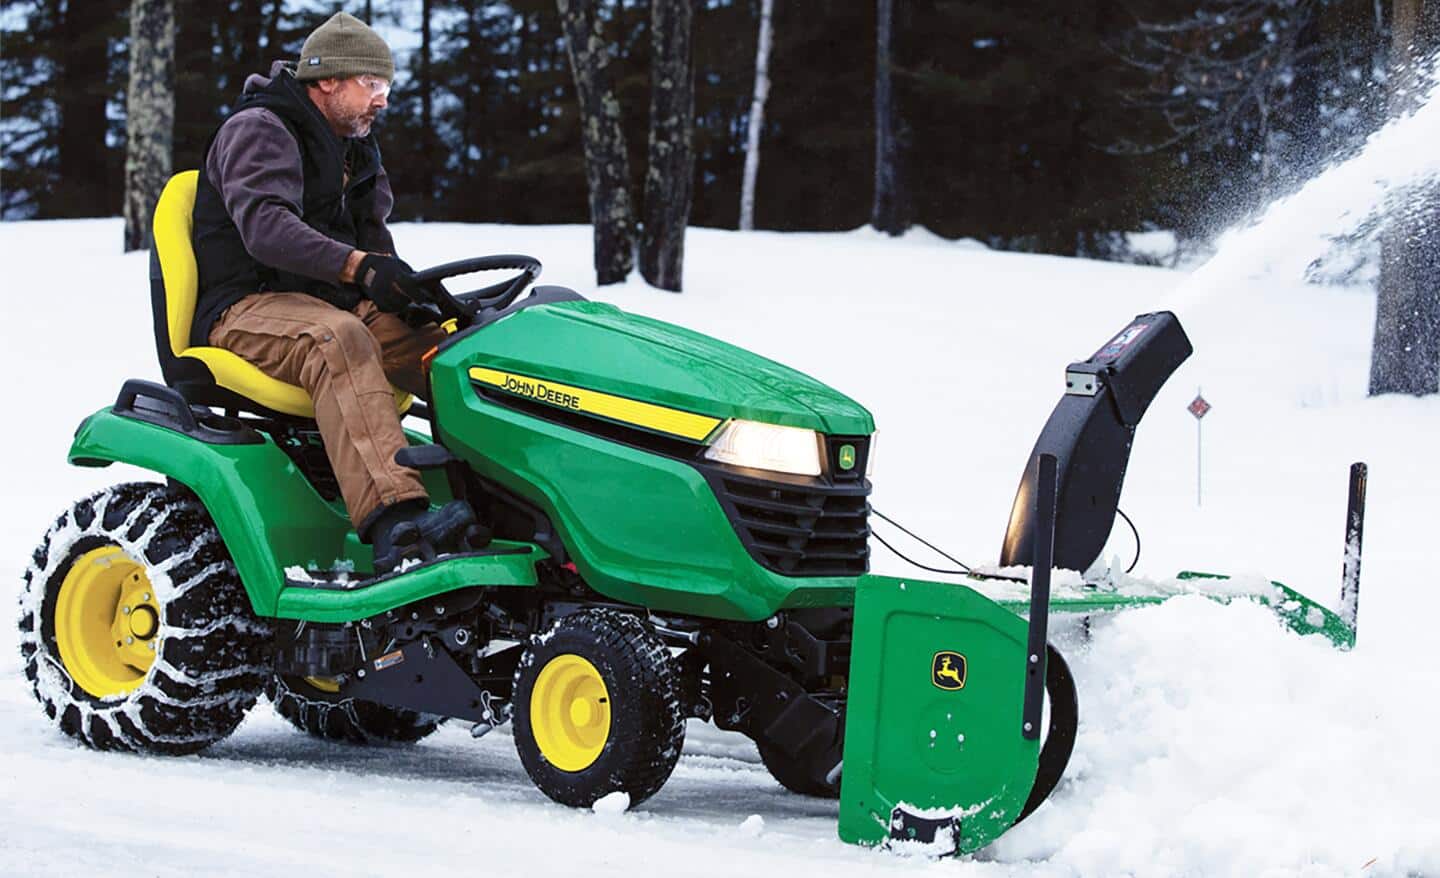 A person uses a riding mower with a snow plow attachment to remove snow.